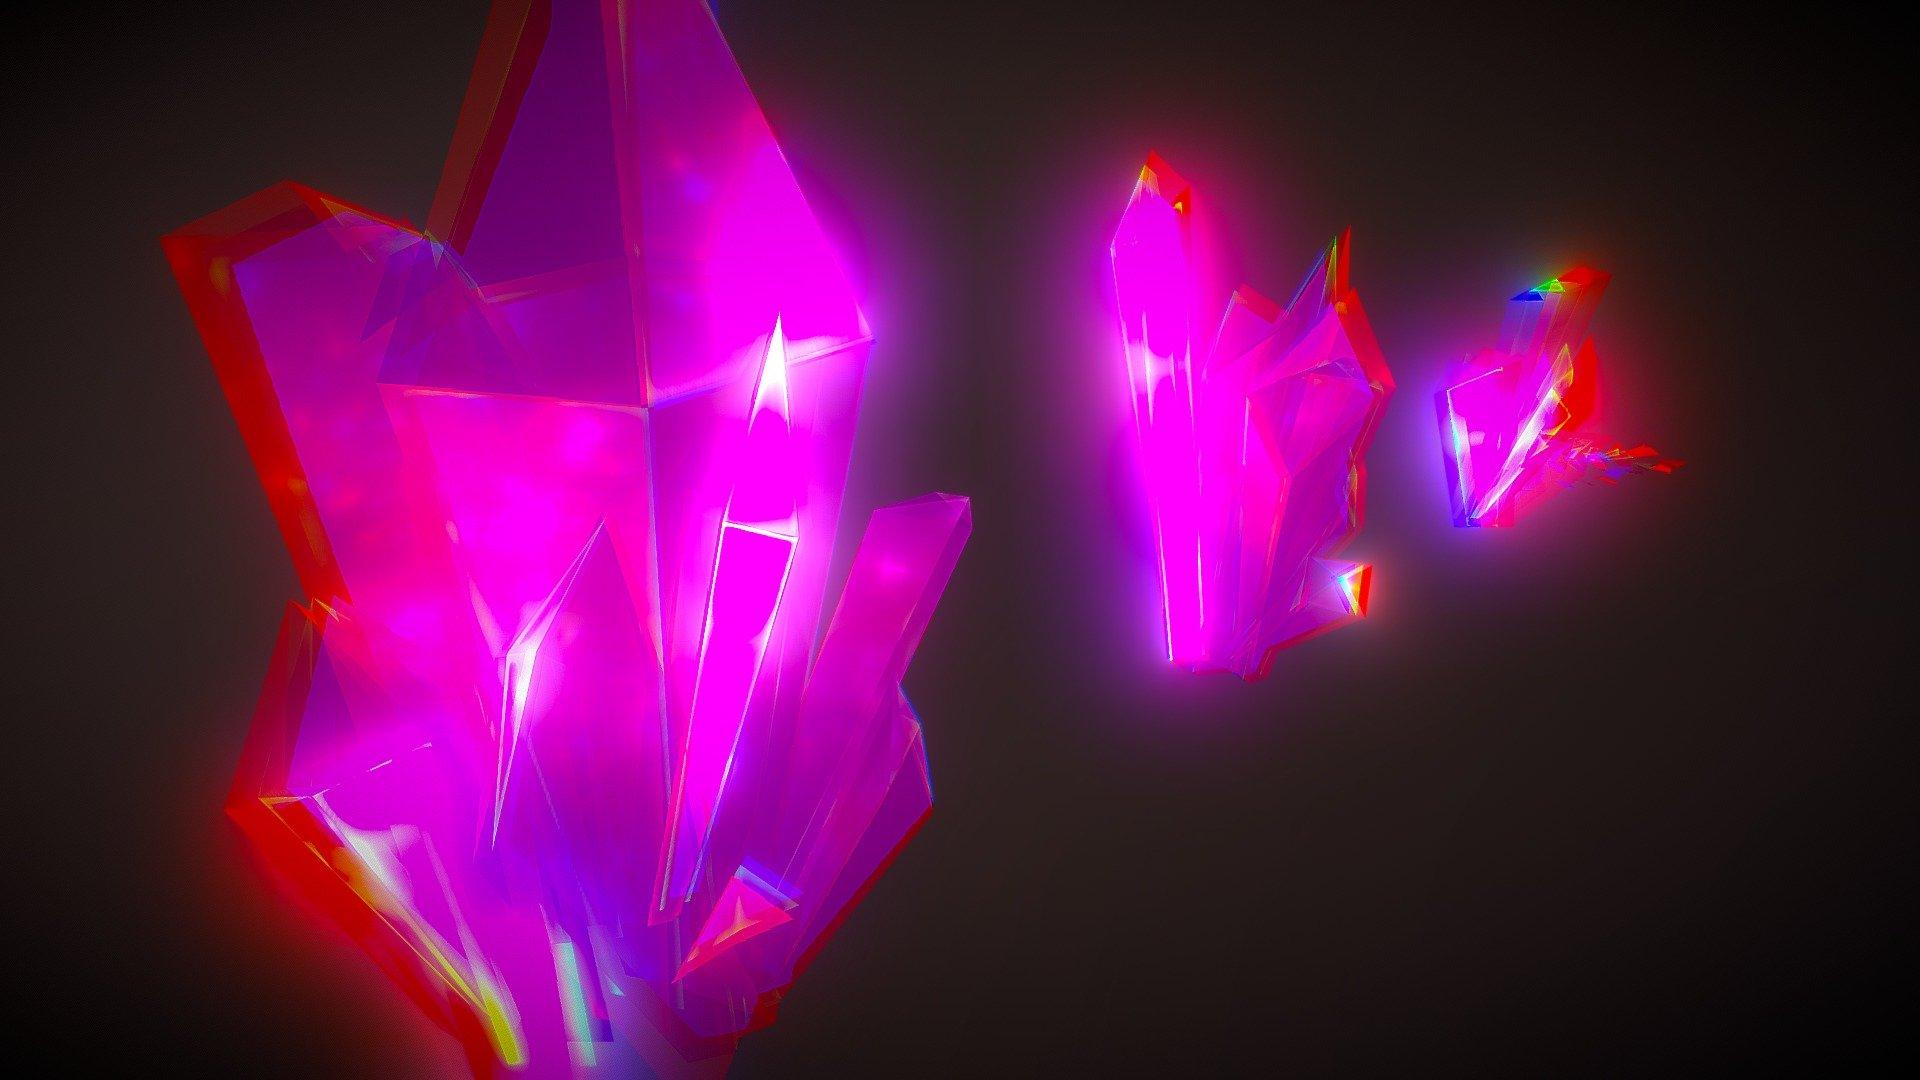 Neon Retro Futuristic Crystals. Low Poly Model By Yarenyao